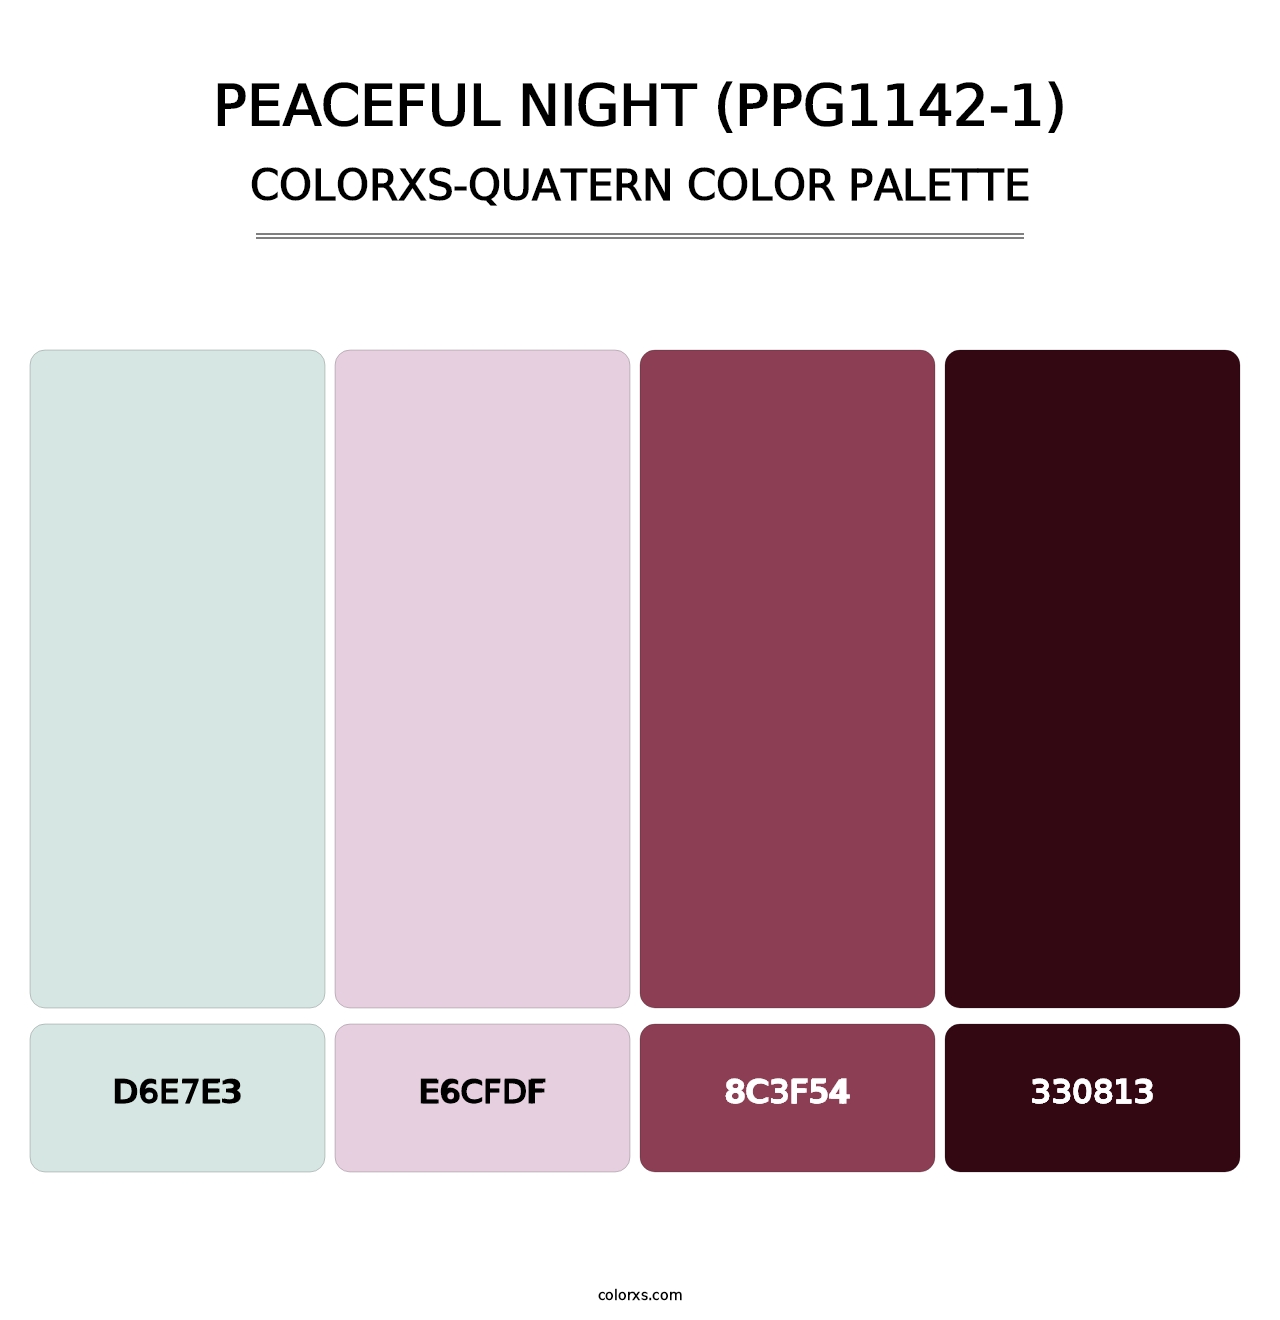 Peaceful Night (PPG1142-1) - Colorxs Quatern Palette